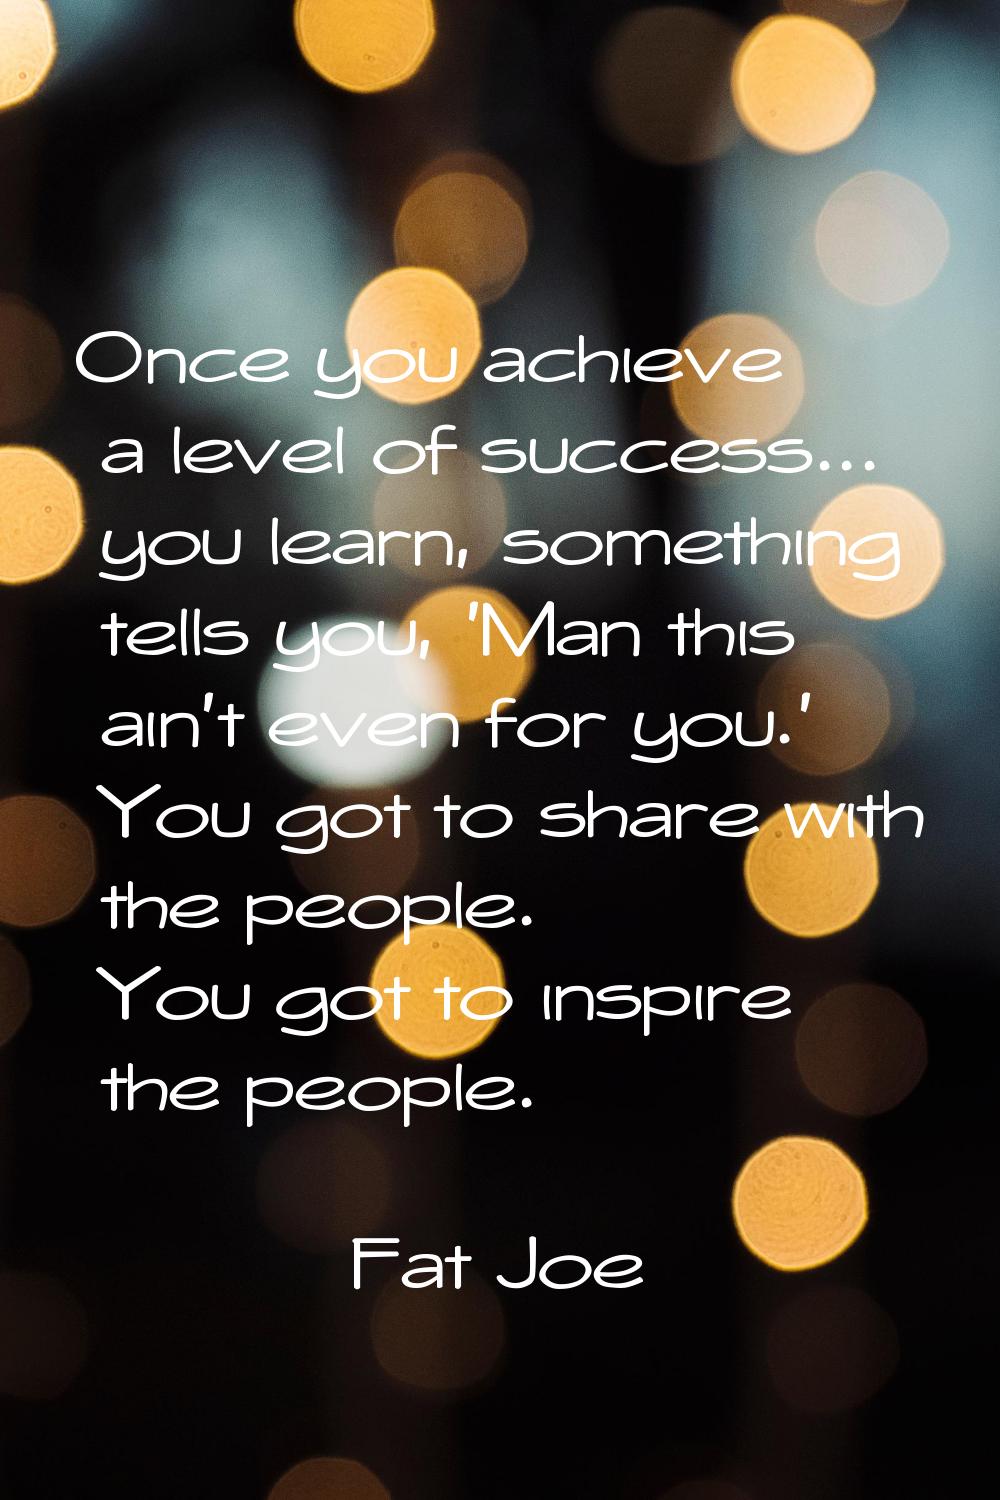 Once you achieve a level of success... you learn, something tells you, 'Man this ain't even for you